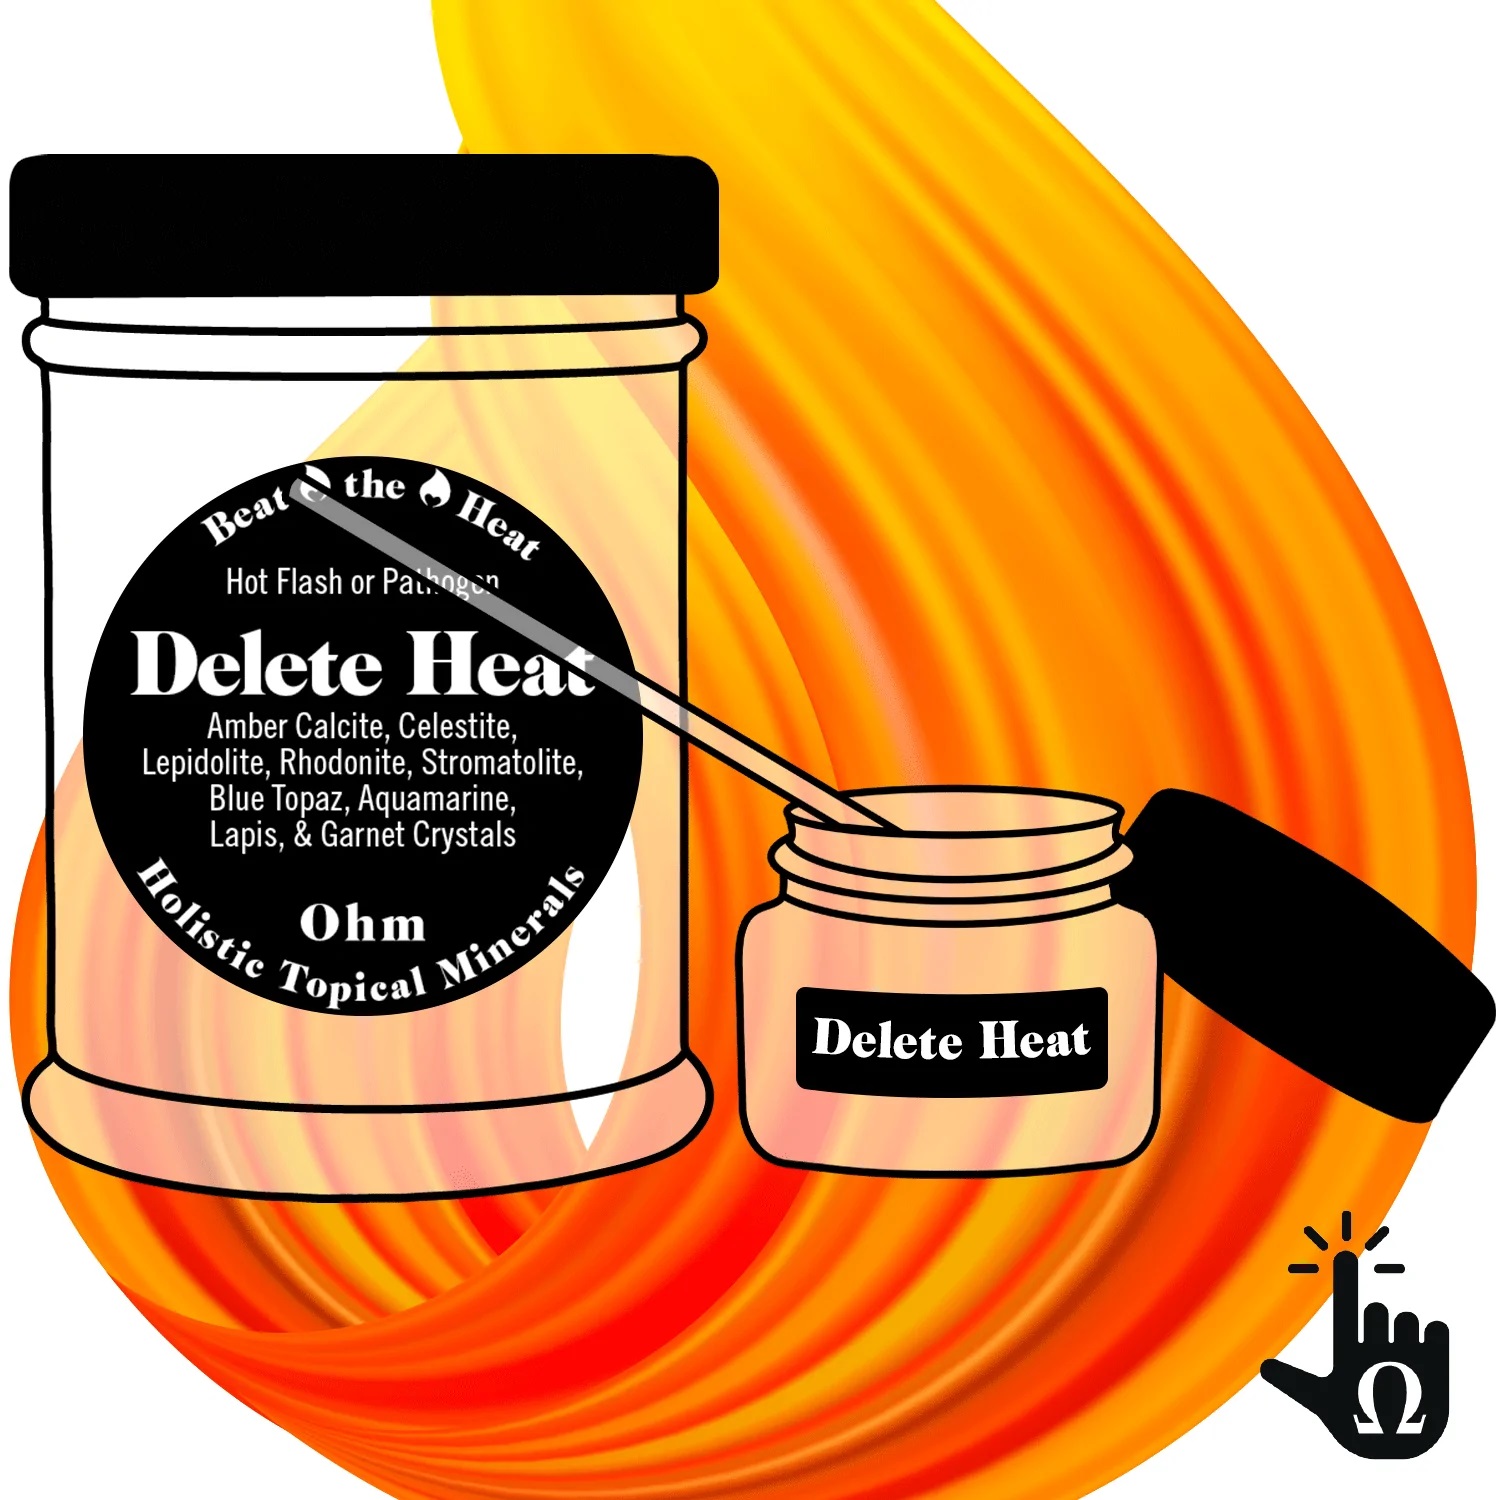 Delete Heat, Topical Mineral